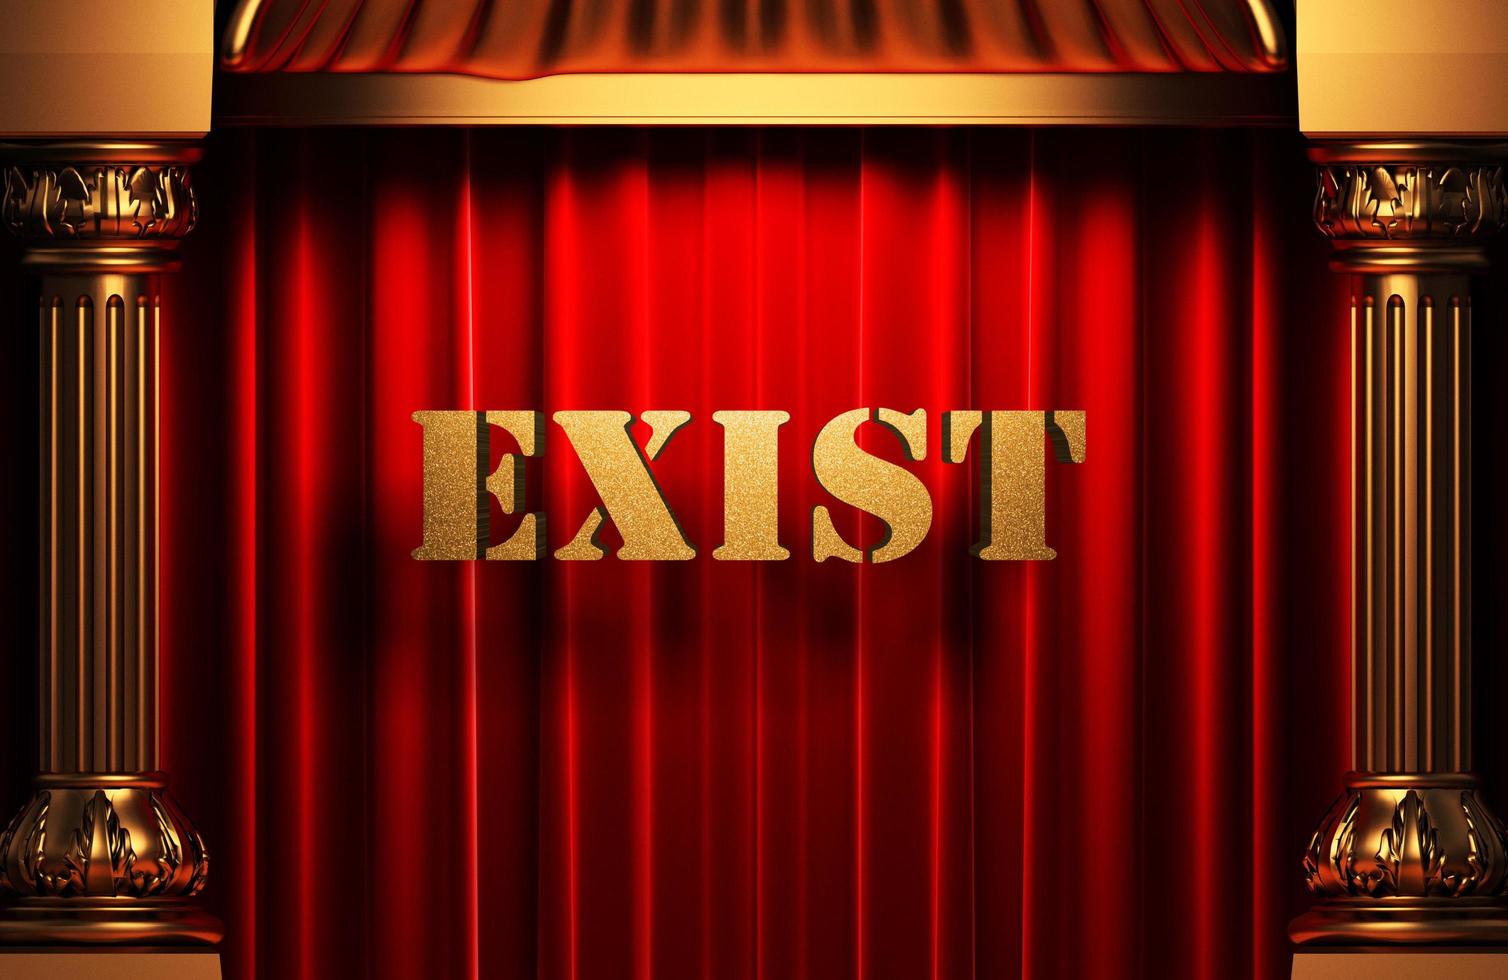 exist golden word on red curtain photo